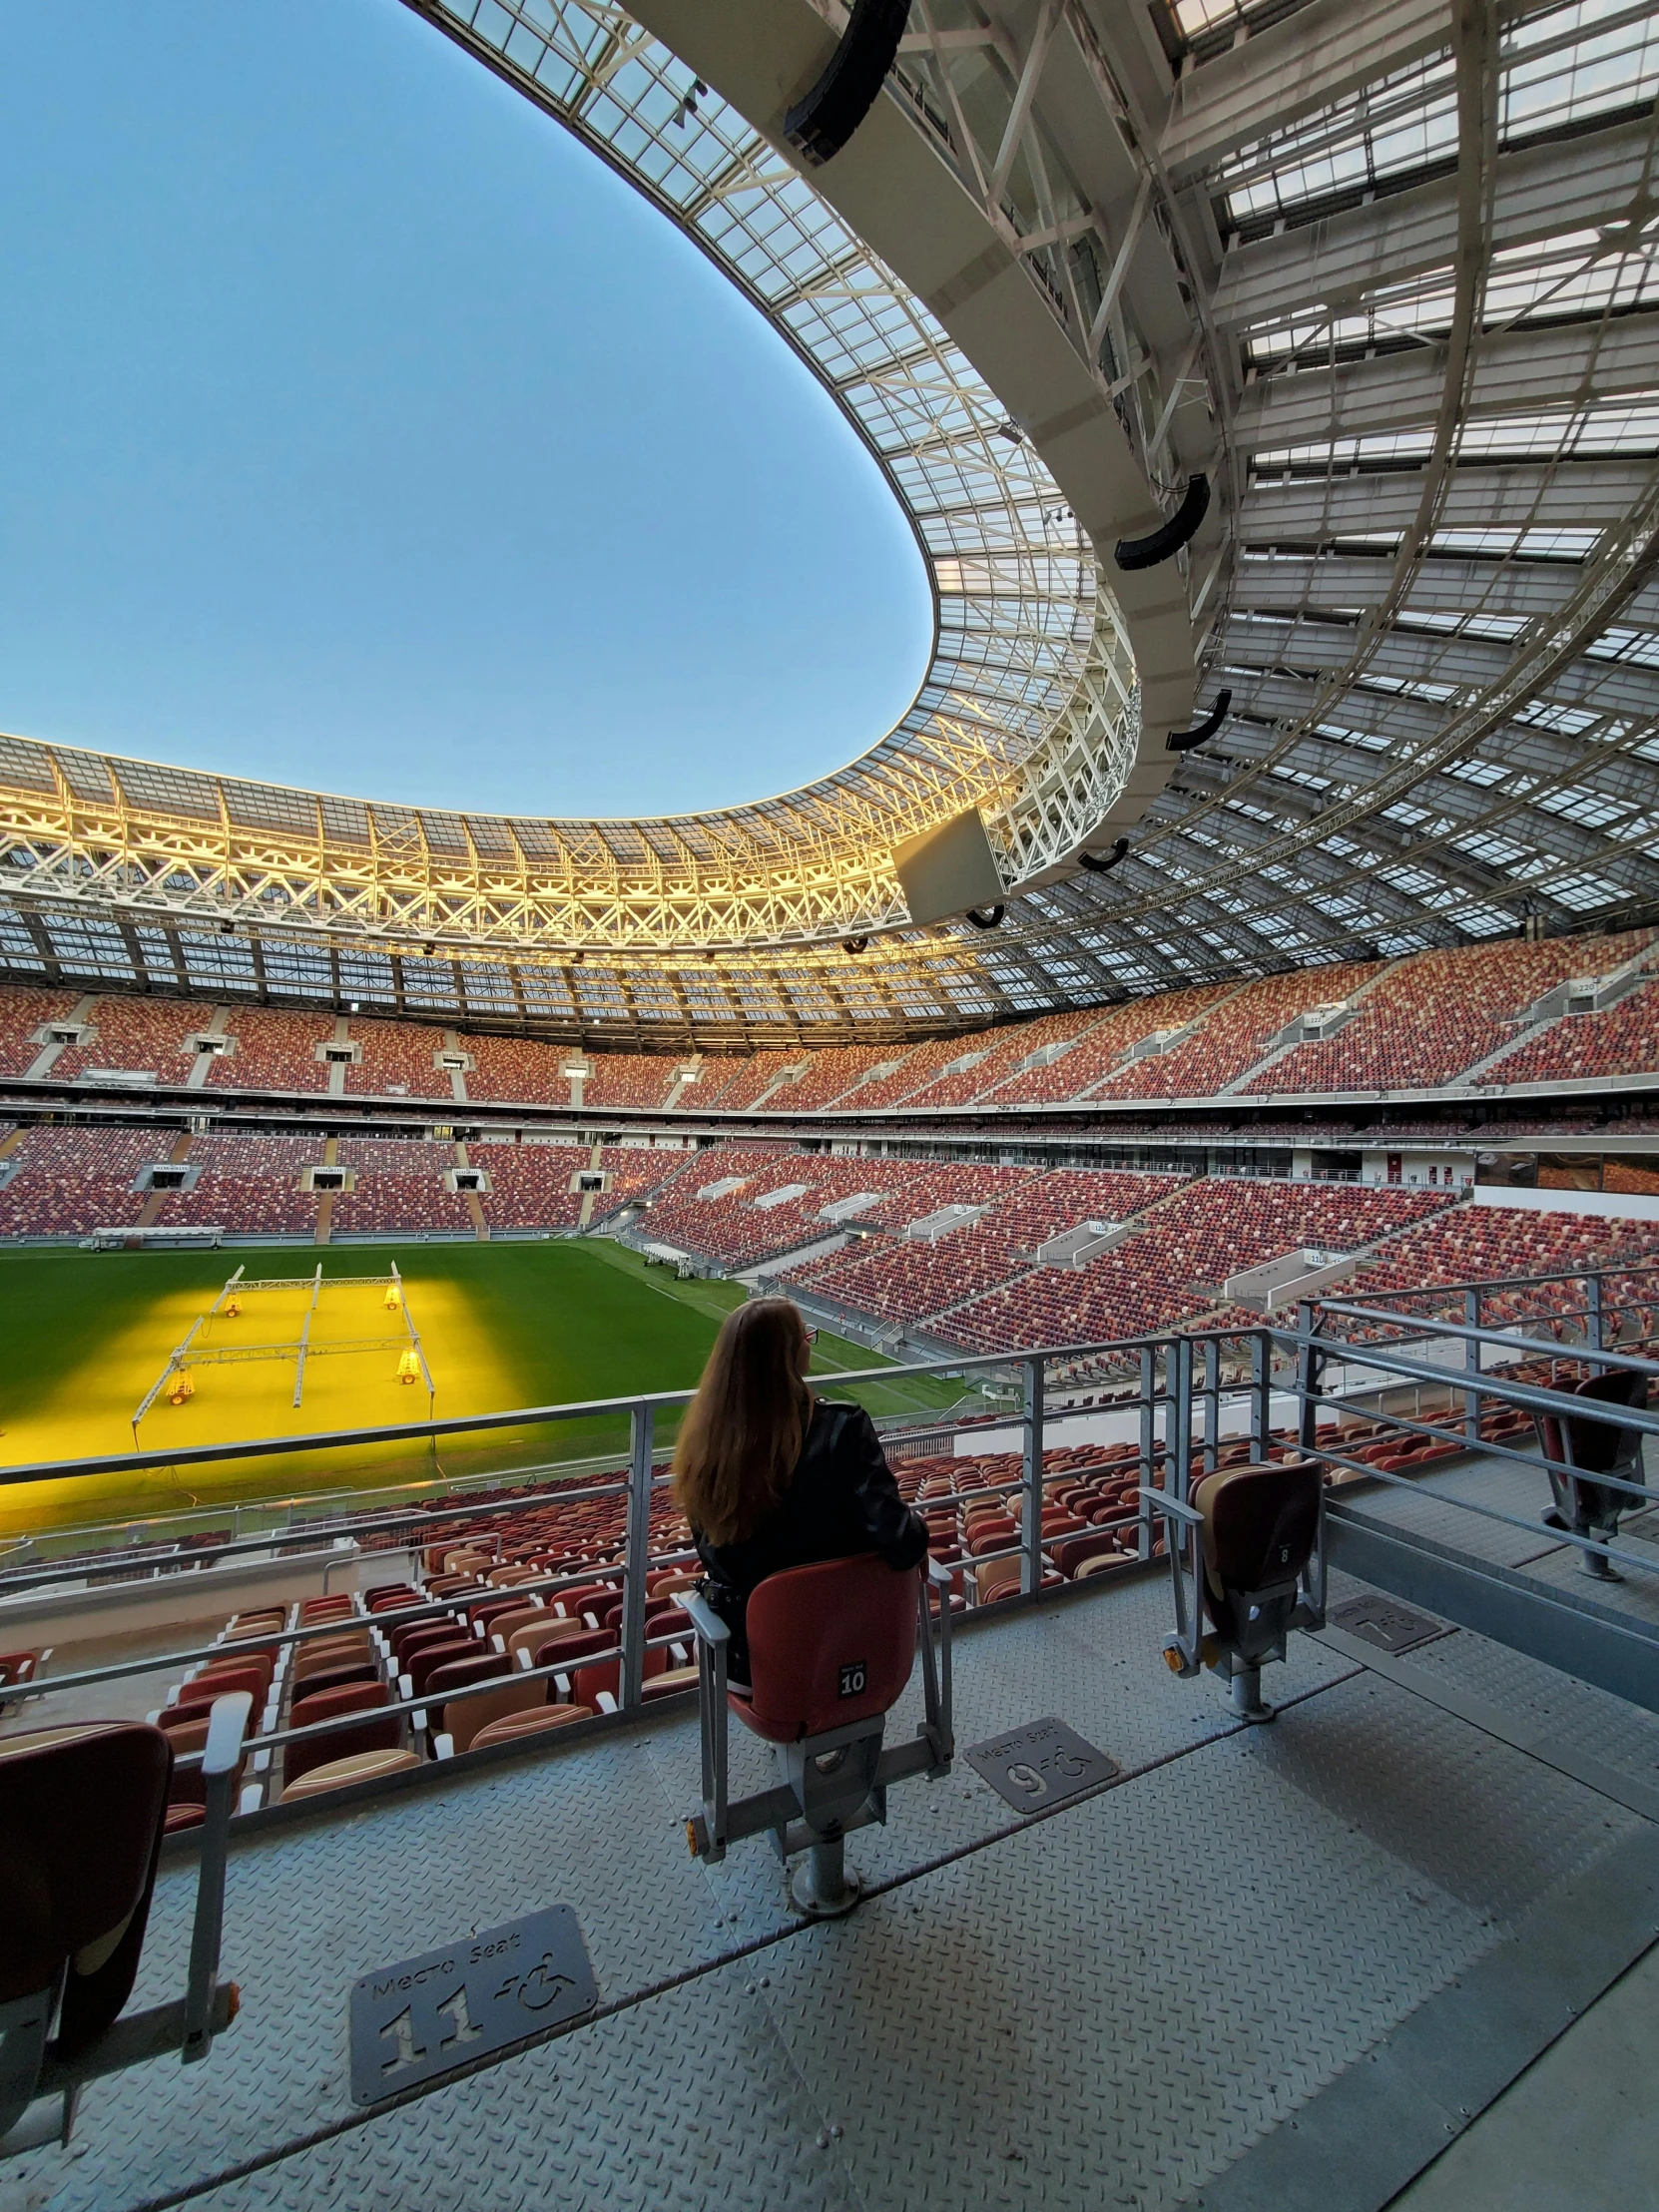 a stadium filled with lots of people sitting next to each other, russian architecture, profile image, window view, brown